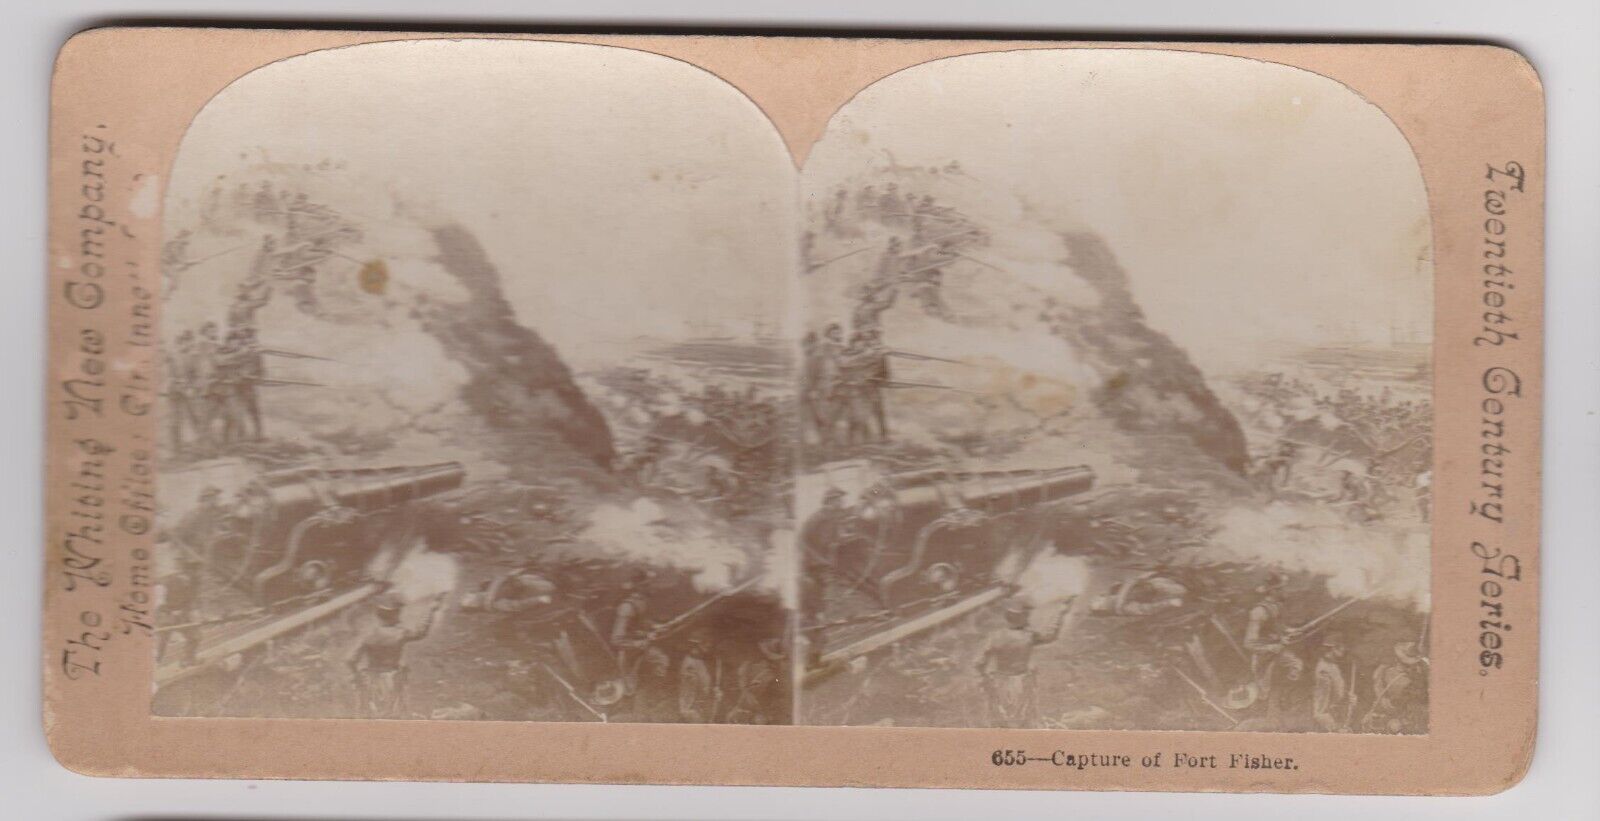 Antique Stereoview of Fort Fisher North Carolina  / Civil War Cannon